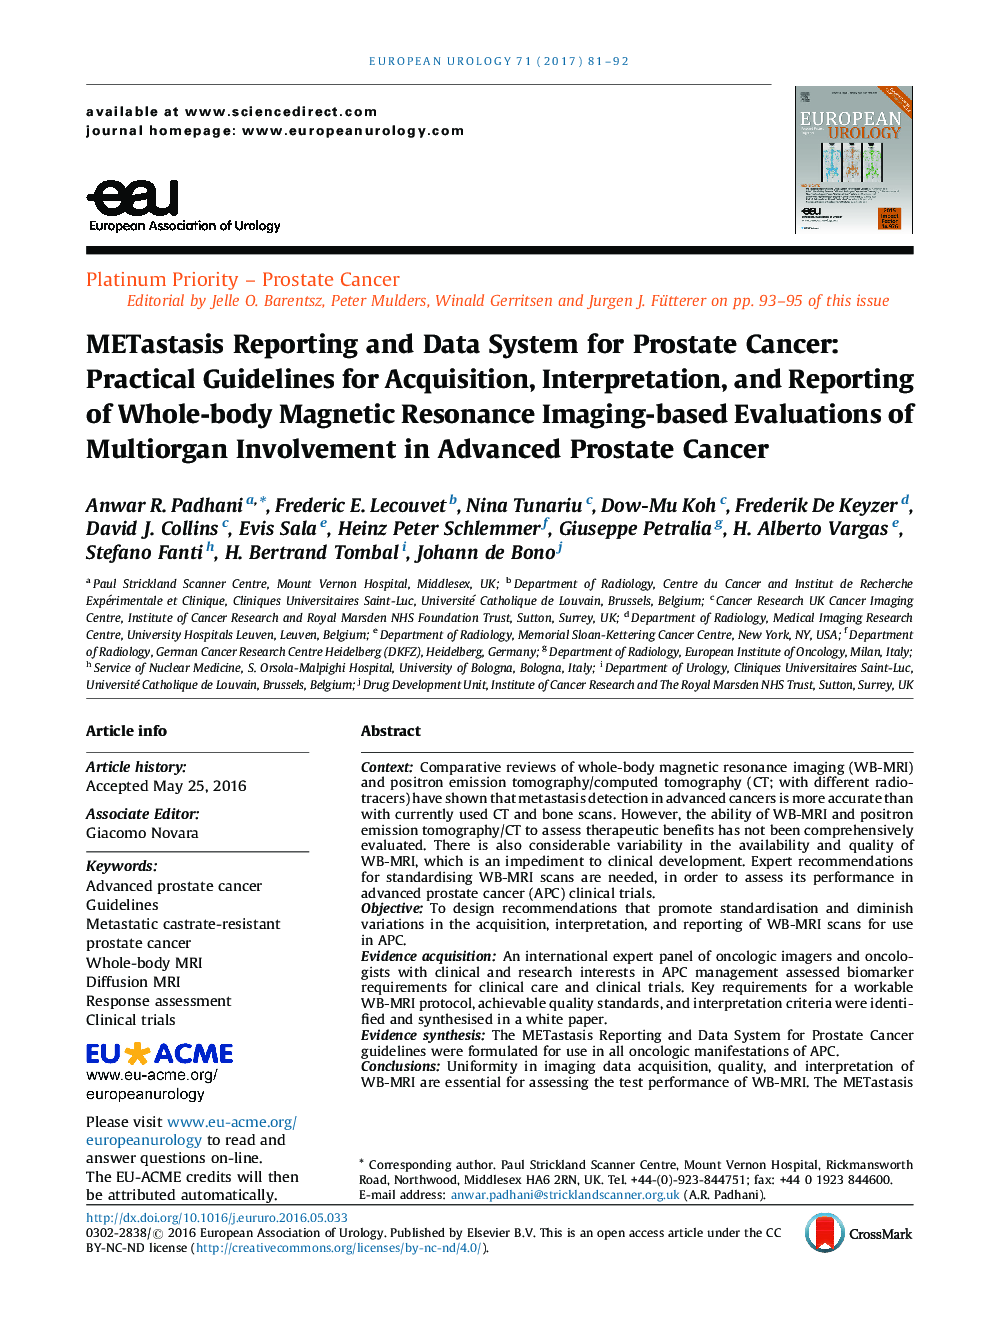 METastasis Reporting and Data System for Prostate Cancer: Practical Guidelines for Acquisition, Interpretation, and Reporting of Whole-body Magnetic Resonance Imaging-based Evaluations of Multiorgan Involvement in Advanced Prostate Cancer